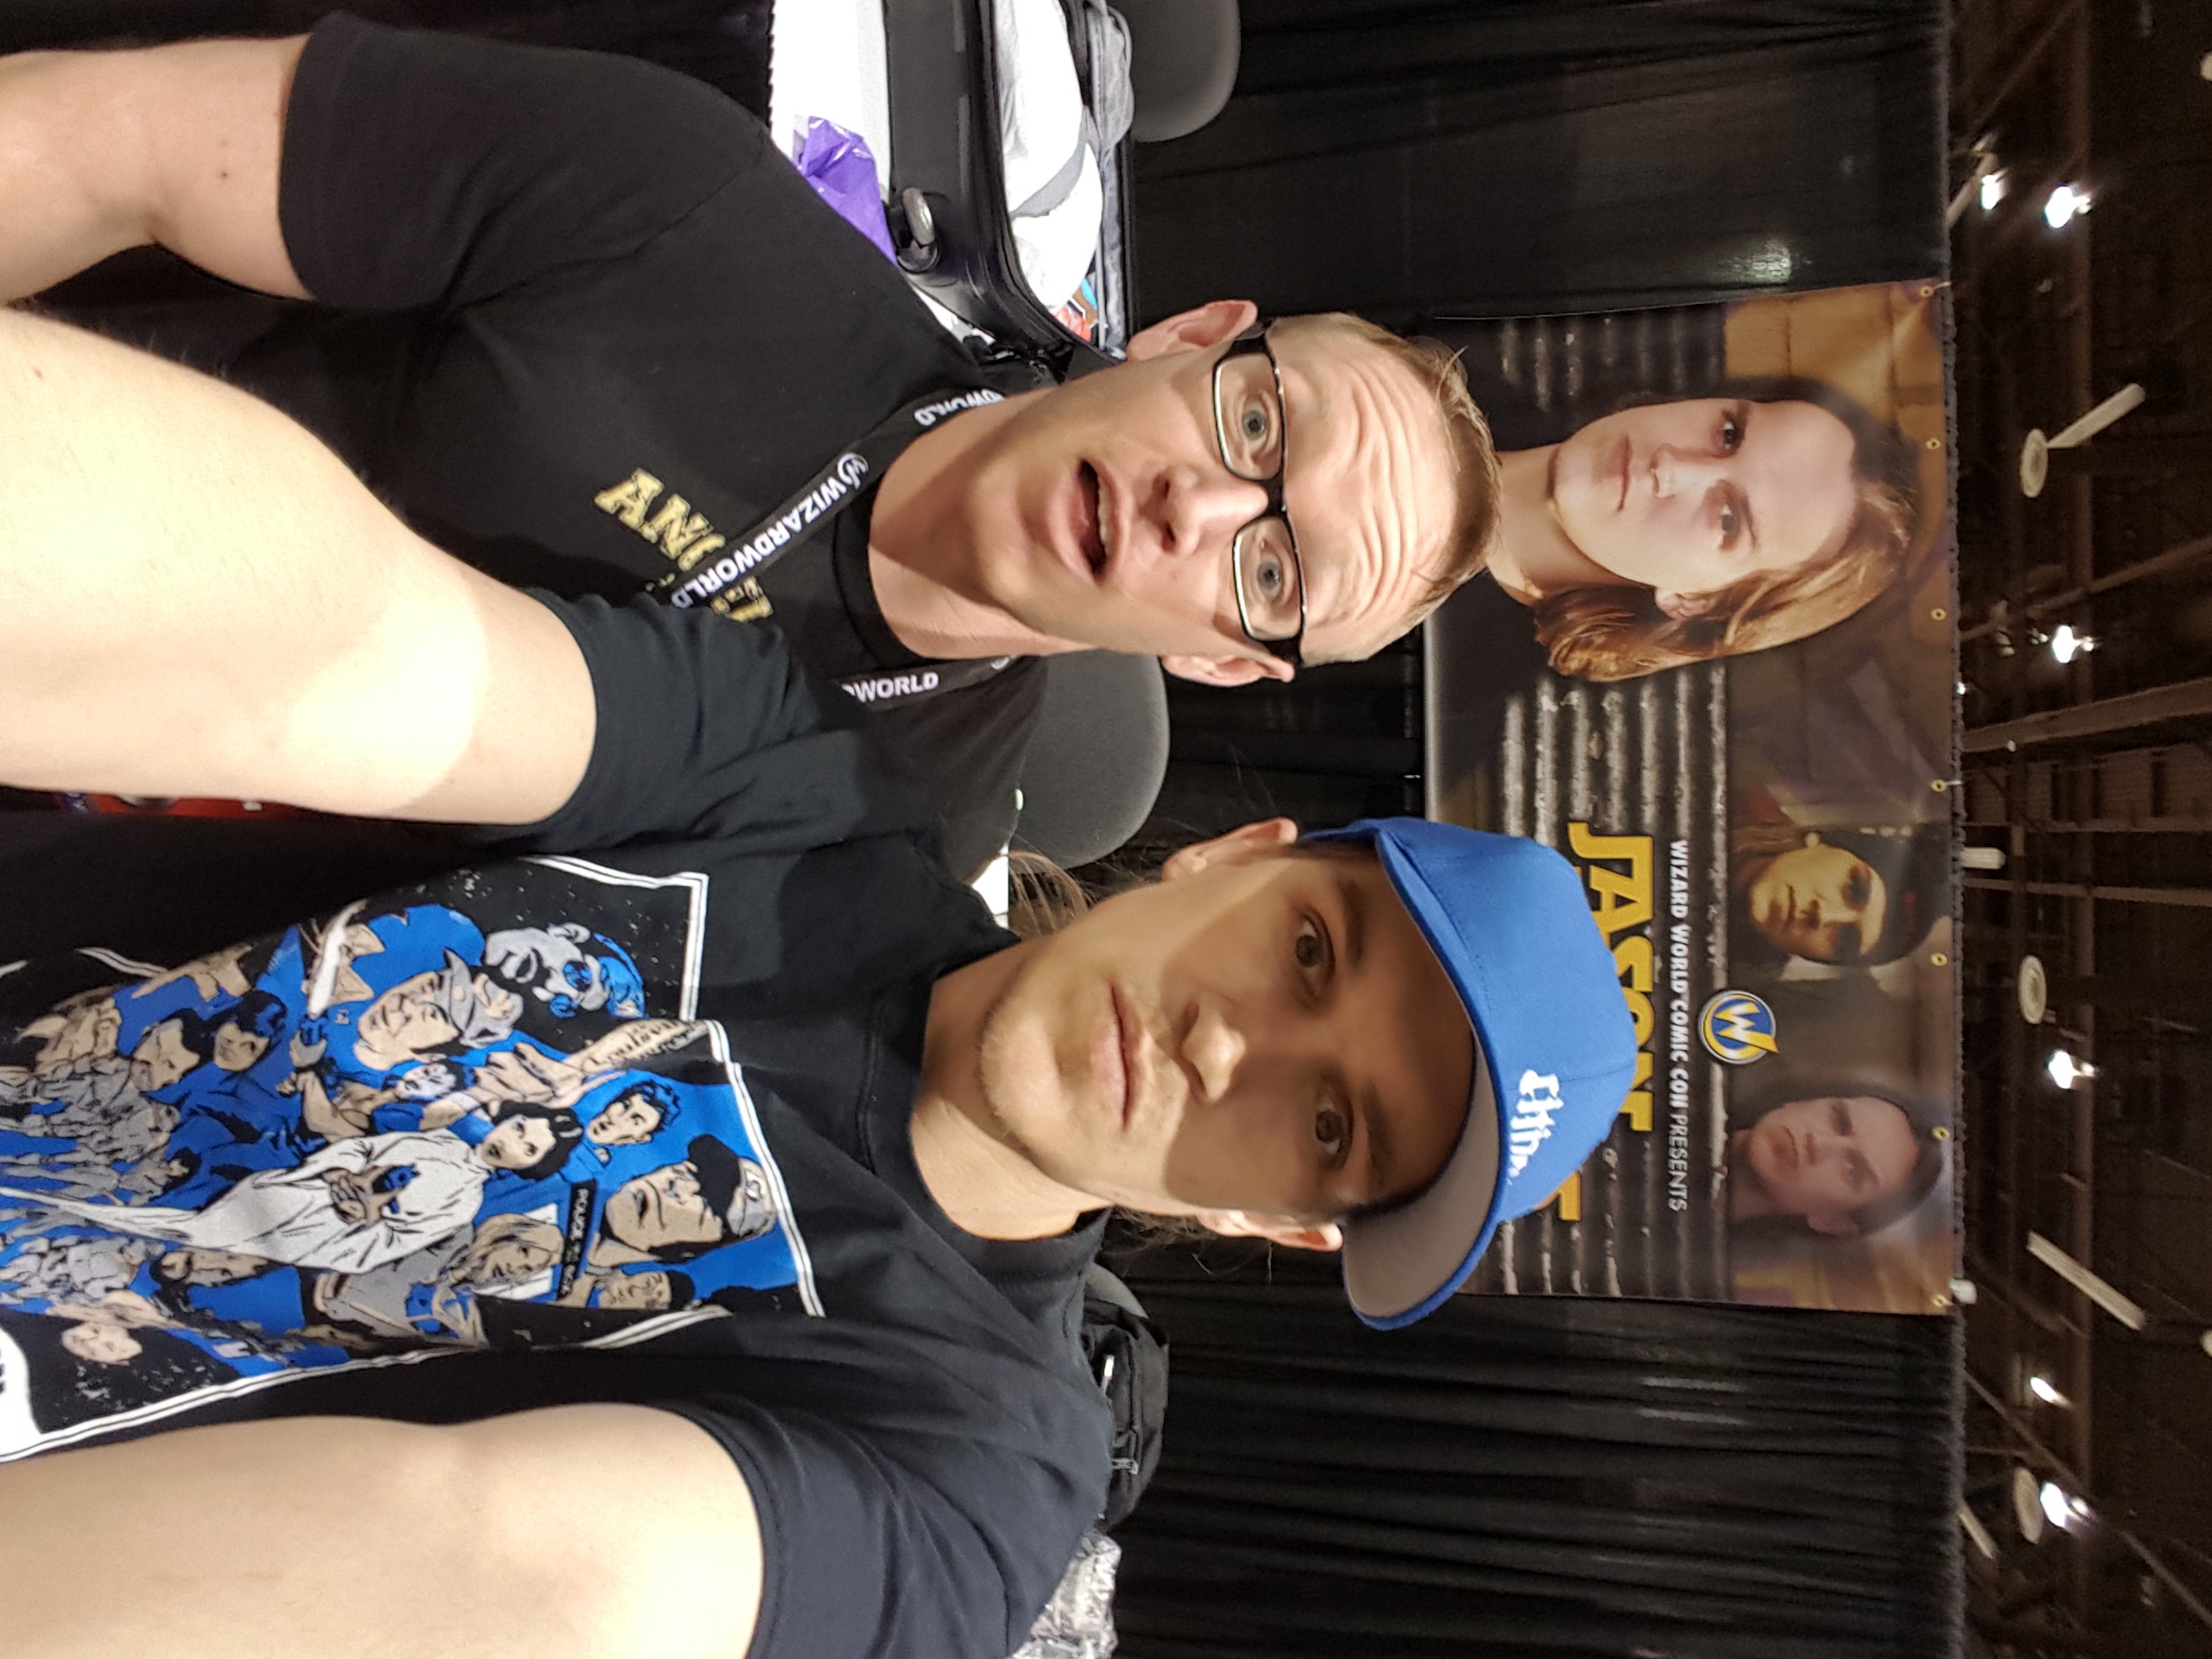 Hanging out with the one and only "Jay" Jason Mewes